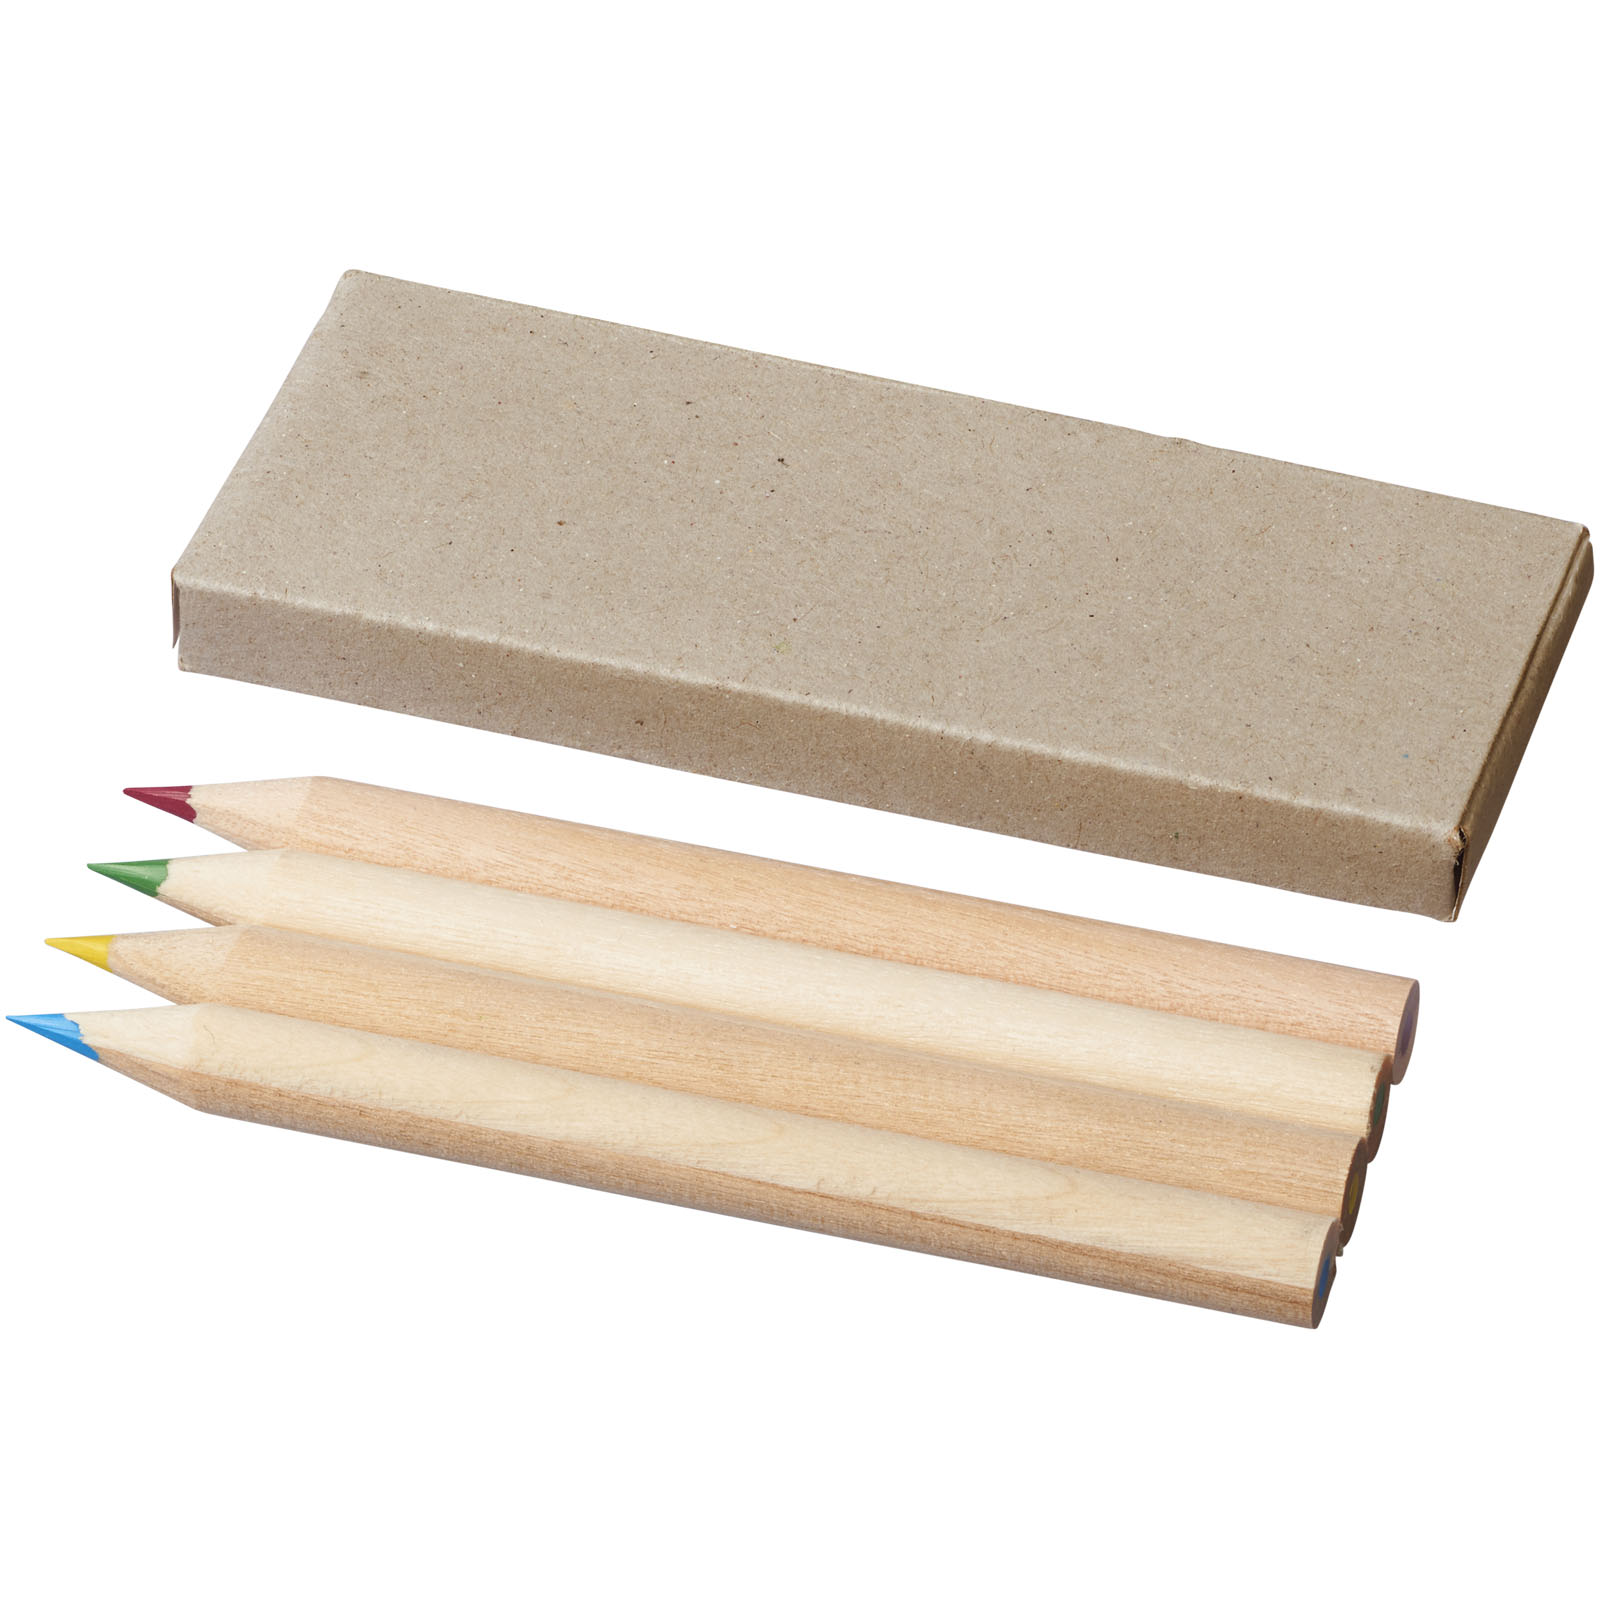 Set of wooden crayons LASSOES in paper box, 4 pieces - light grey